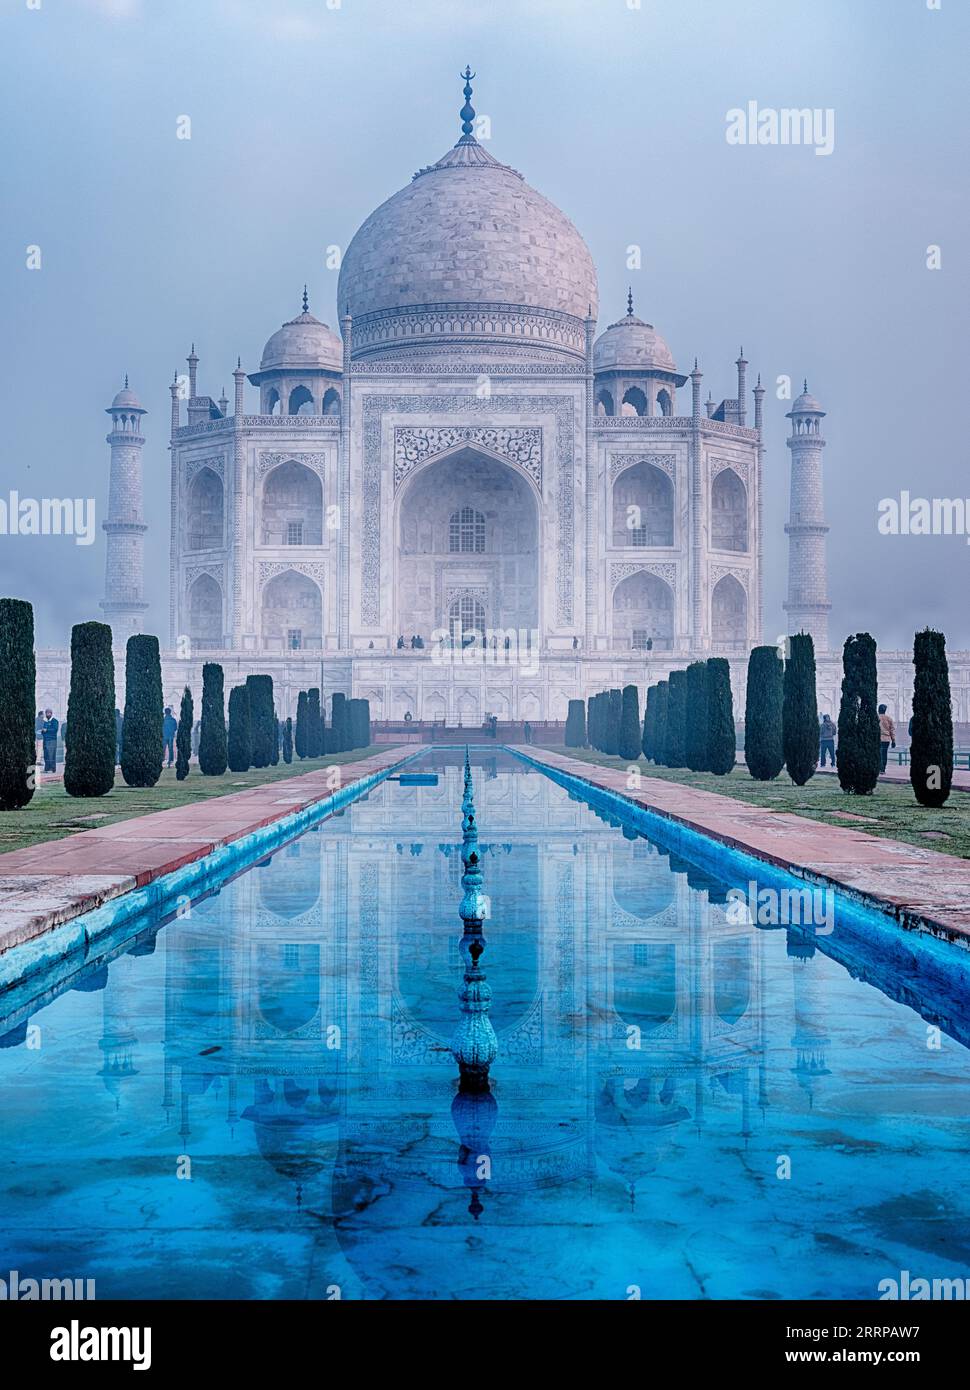 On a misty morning, the reflecting pool leads towards the Taj Mahal in Agra. Stock Photo